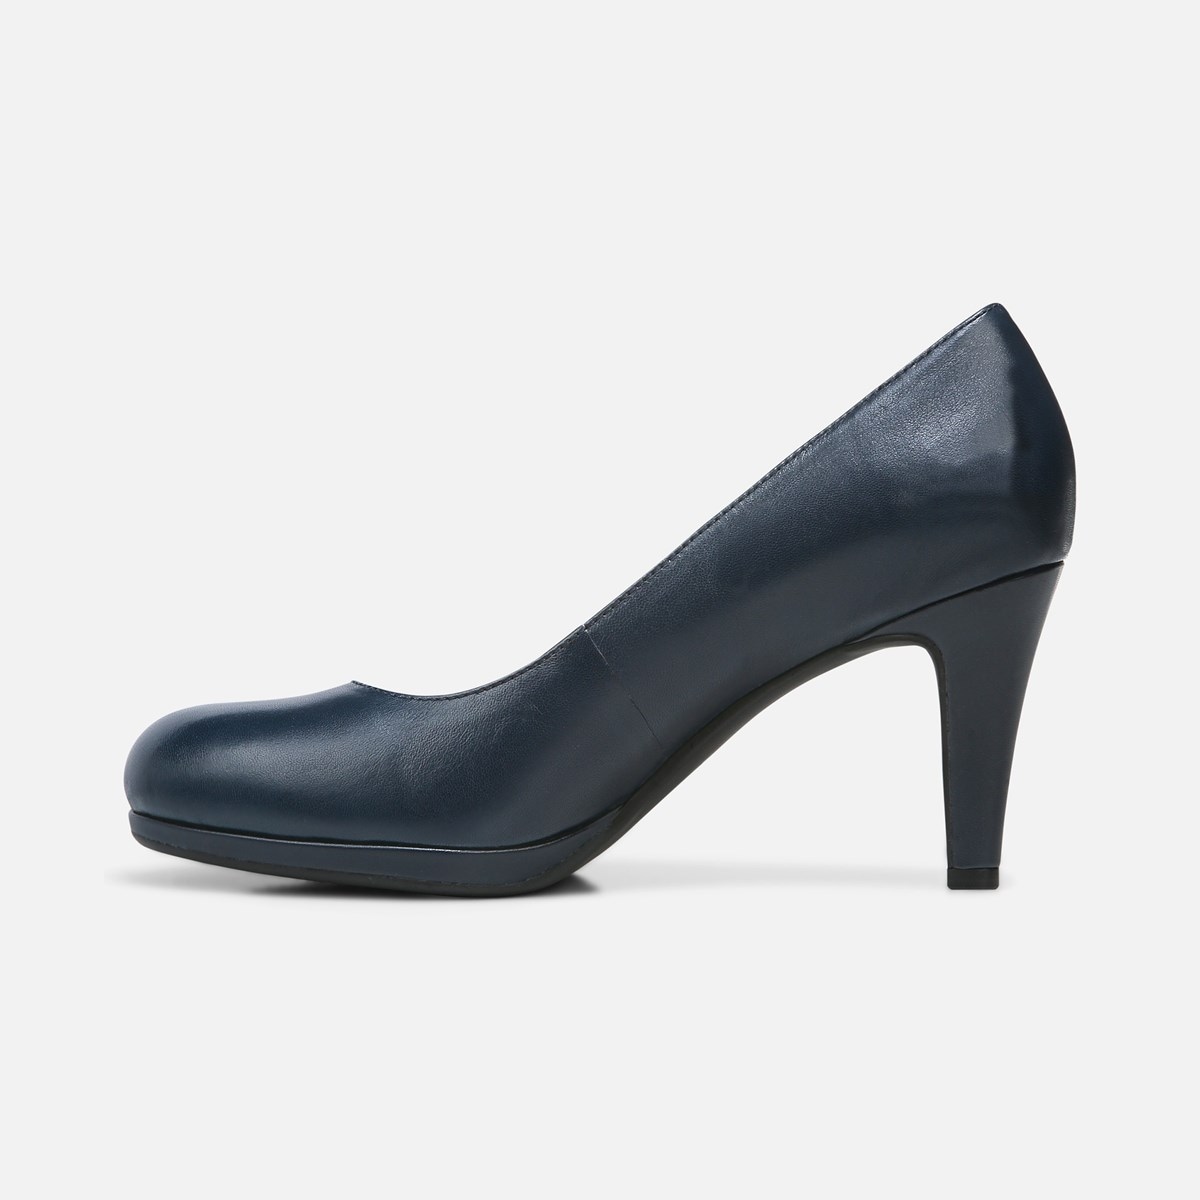 Naturalizer Michelle in Navy Leather Heels